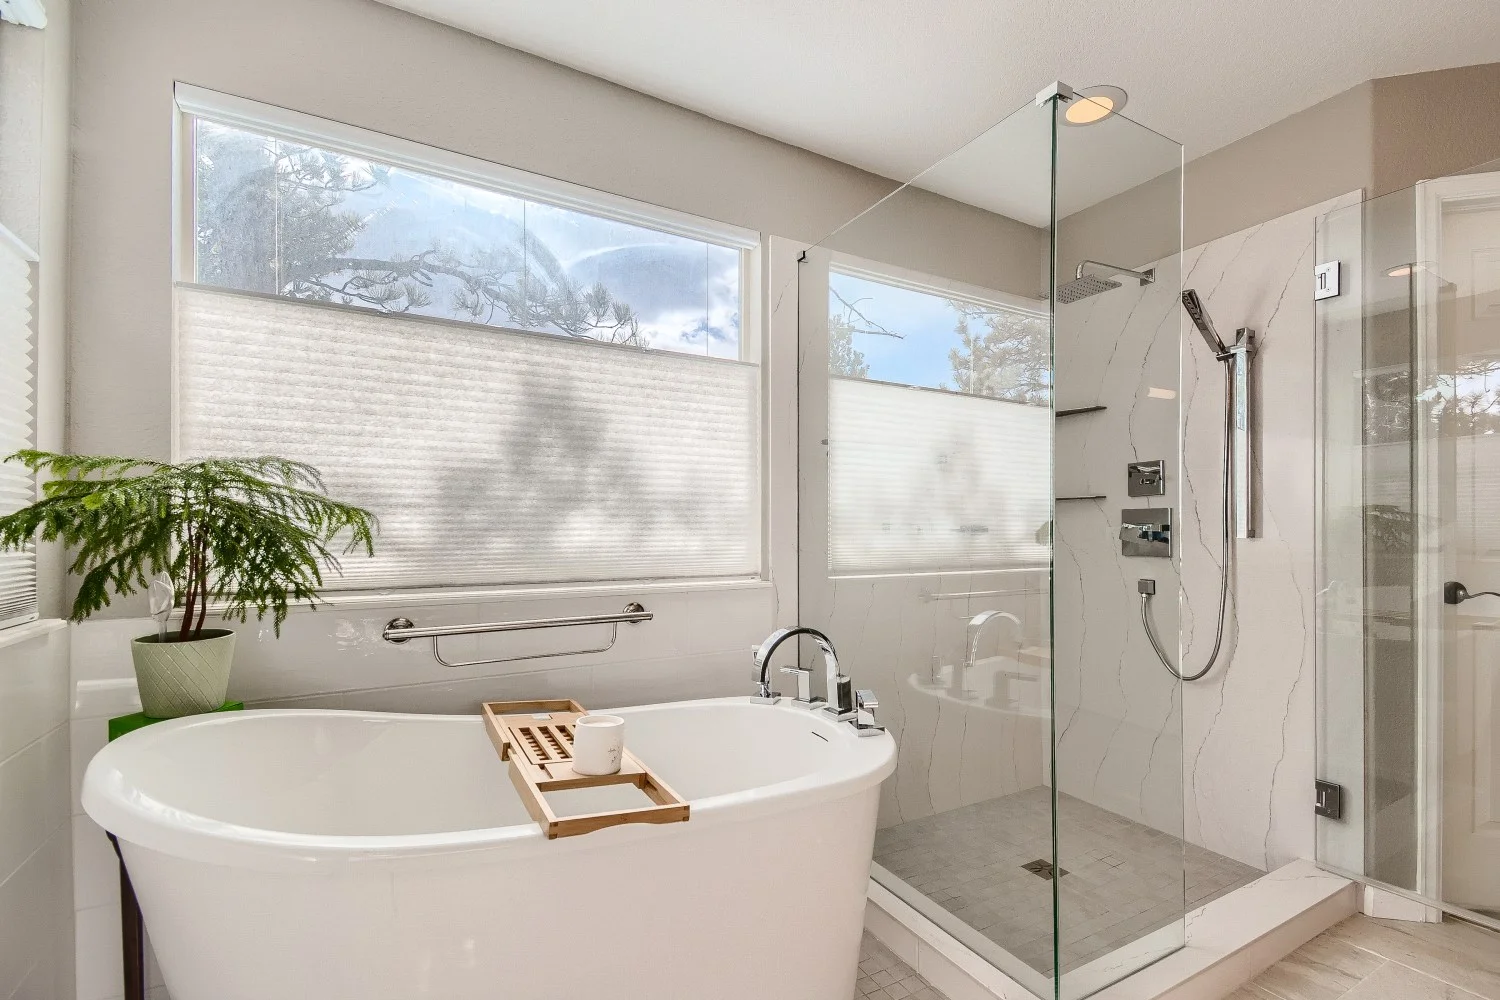 How Often Should a Bathroom Be Updated?